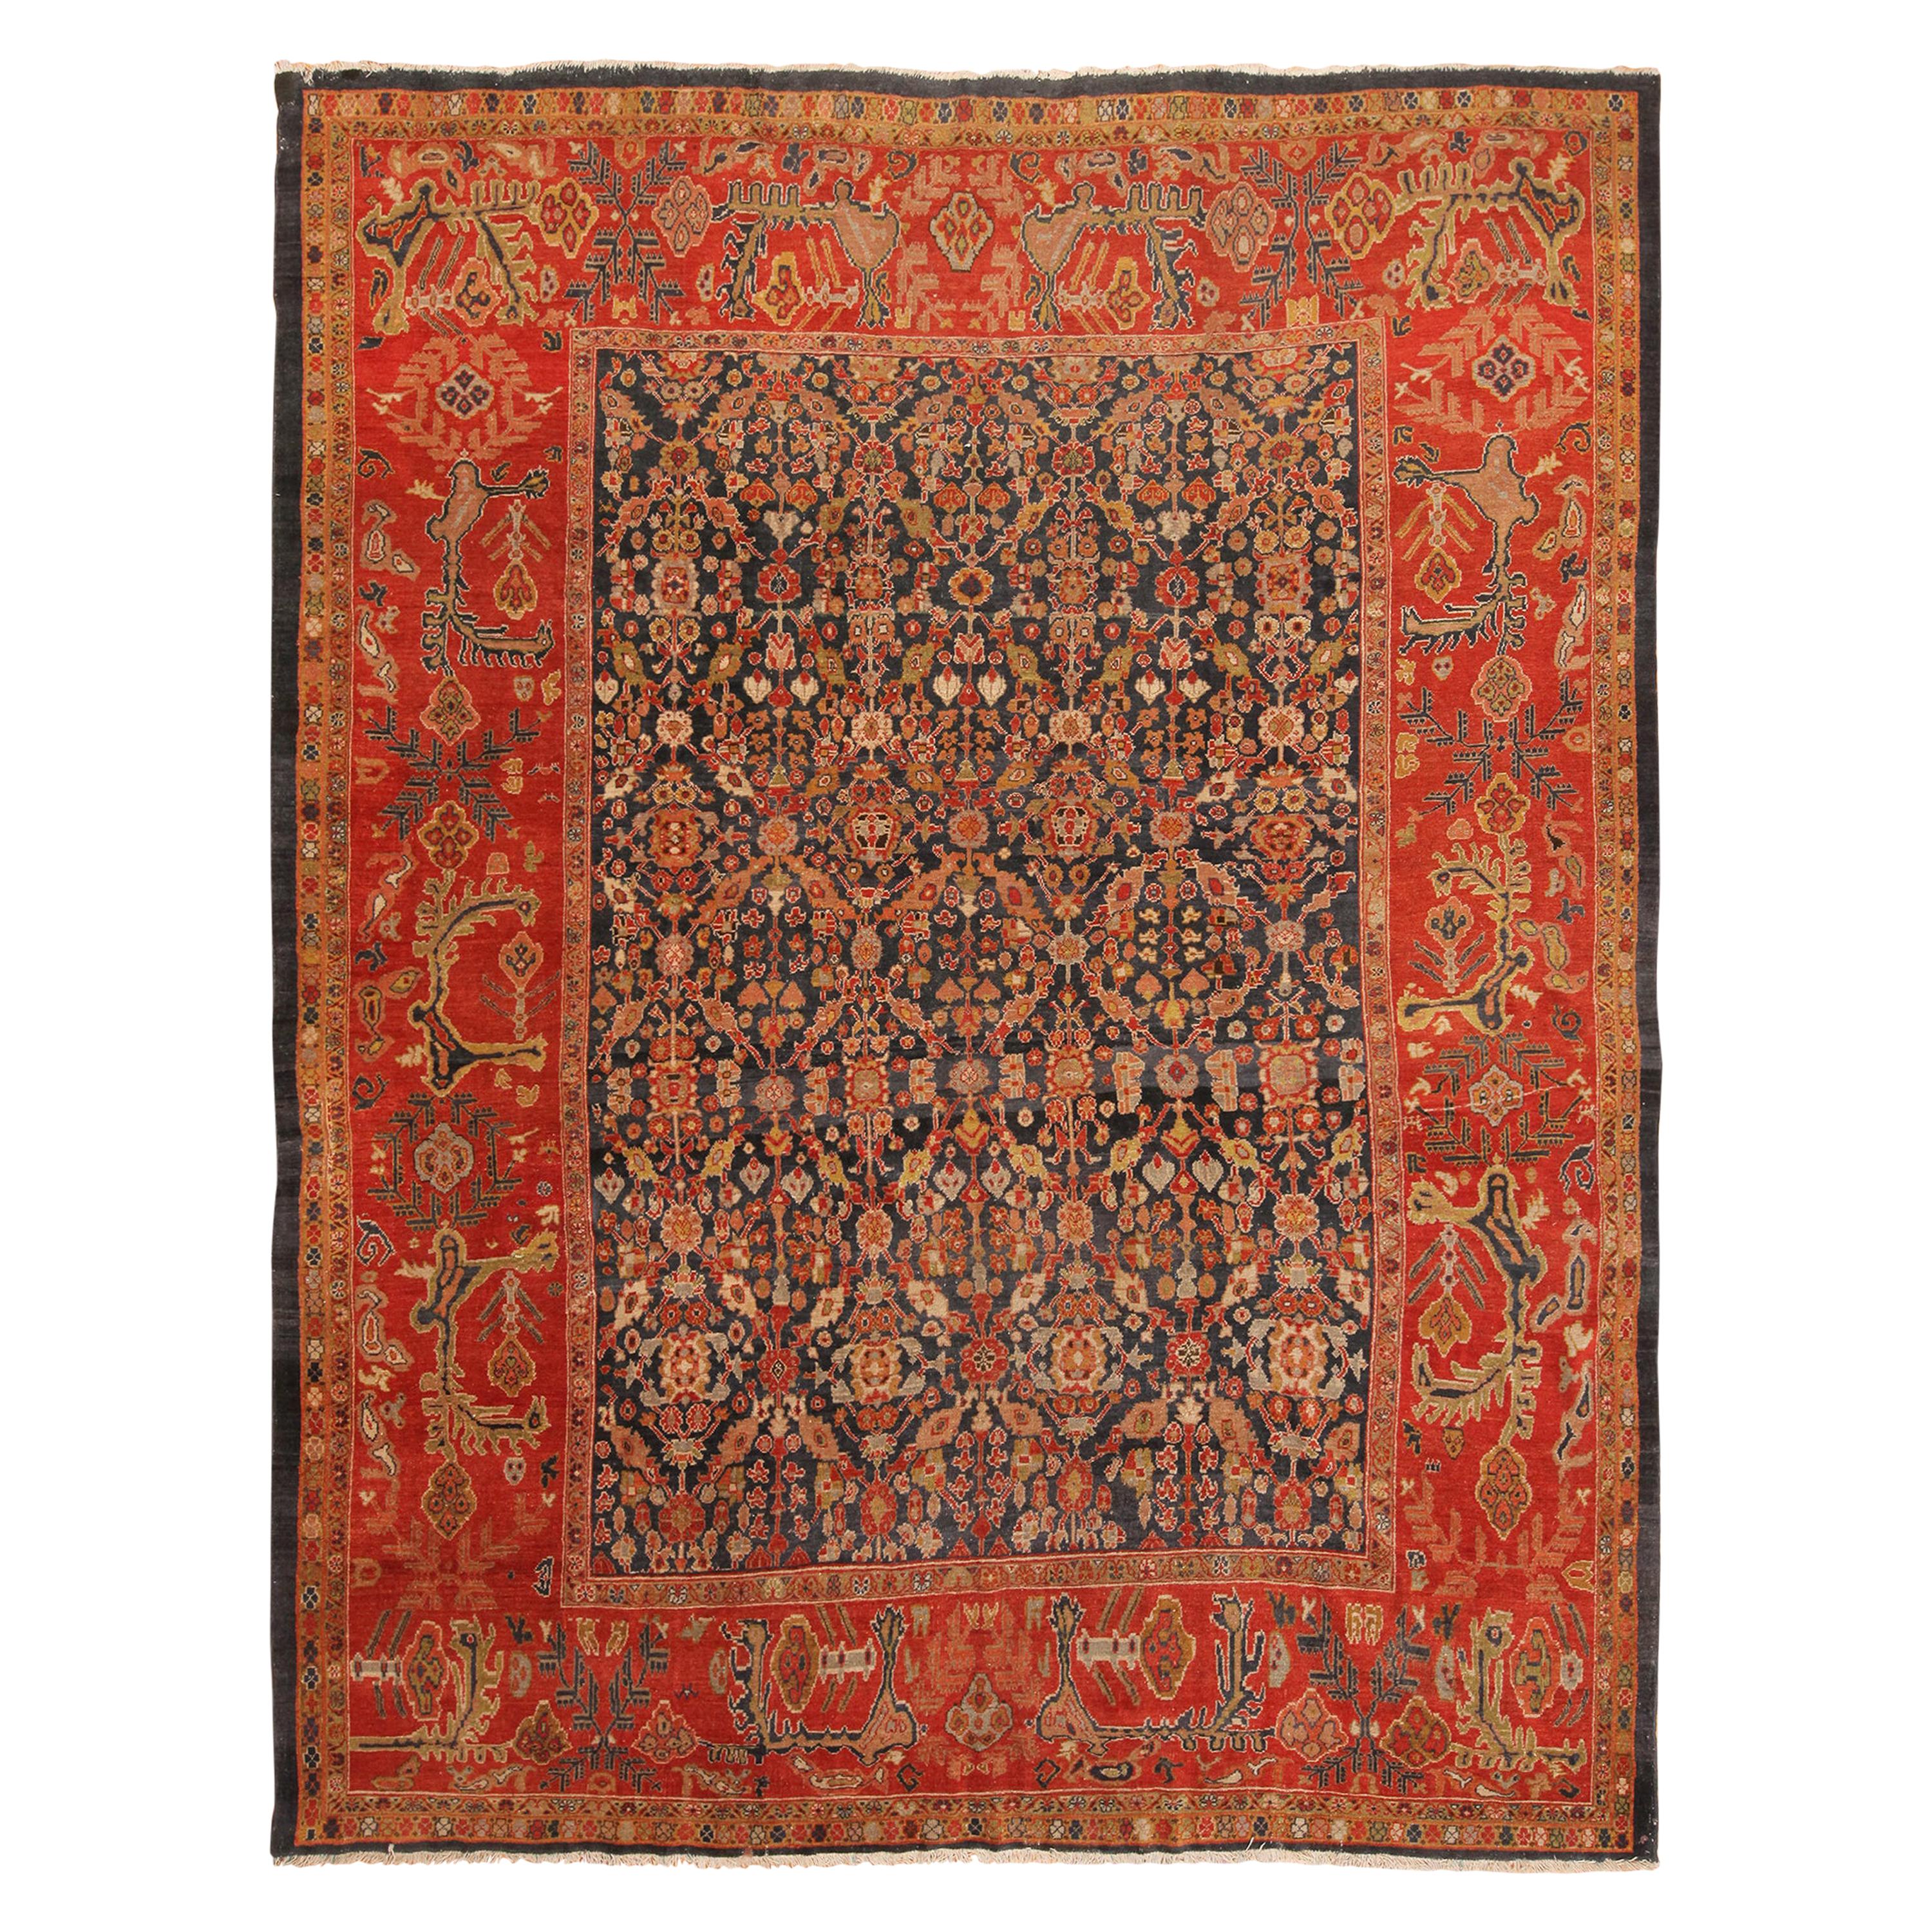 Antique Persian Sultanabad Rug. Size: 10 ft 2 in x 13 ft 2 in (3.1 m x 4.01 m)